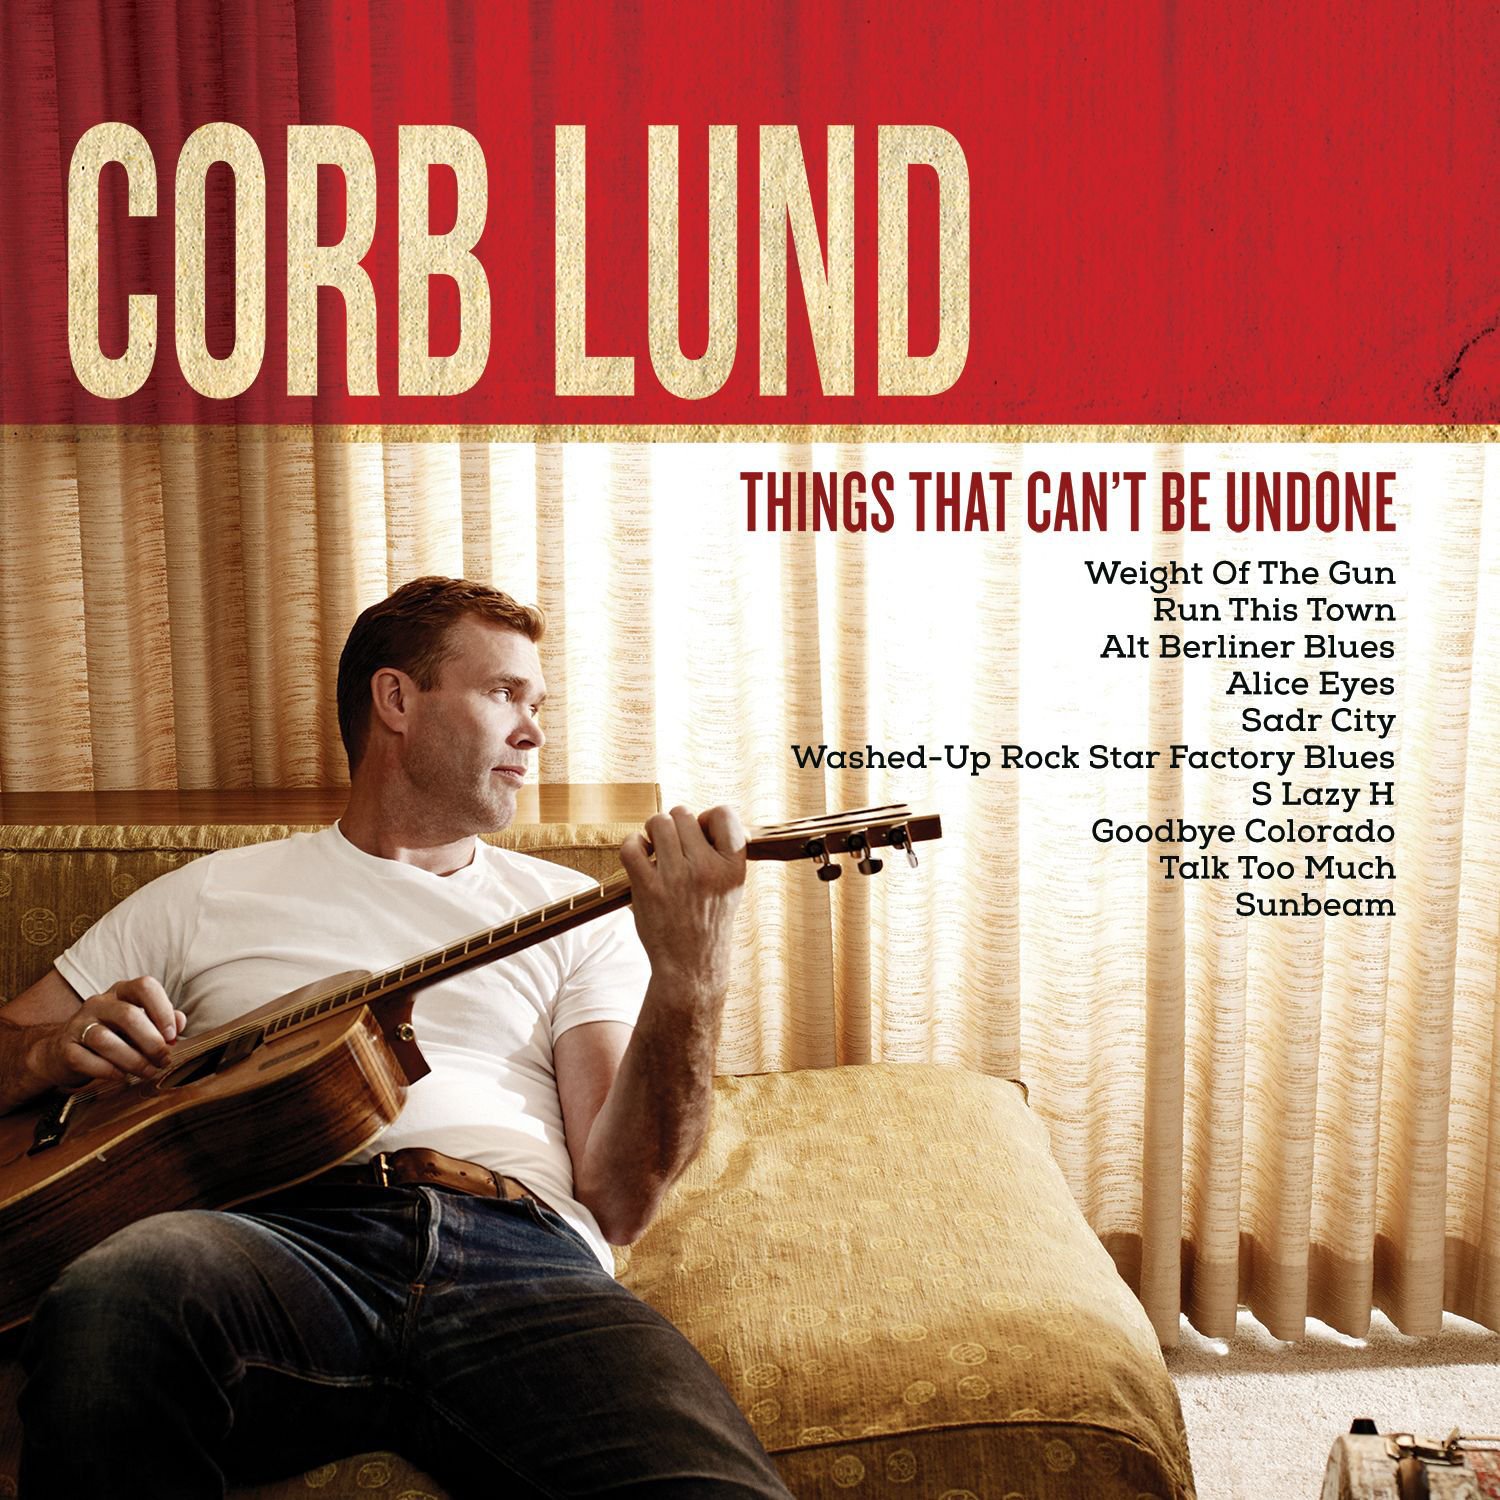 Corb Lund - Things That Can't Be Undone (2015) FLAC Download